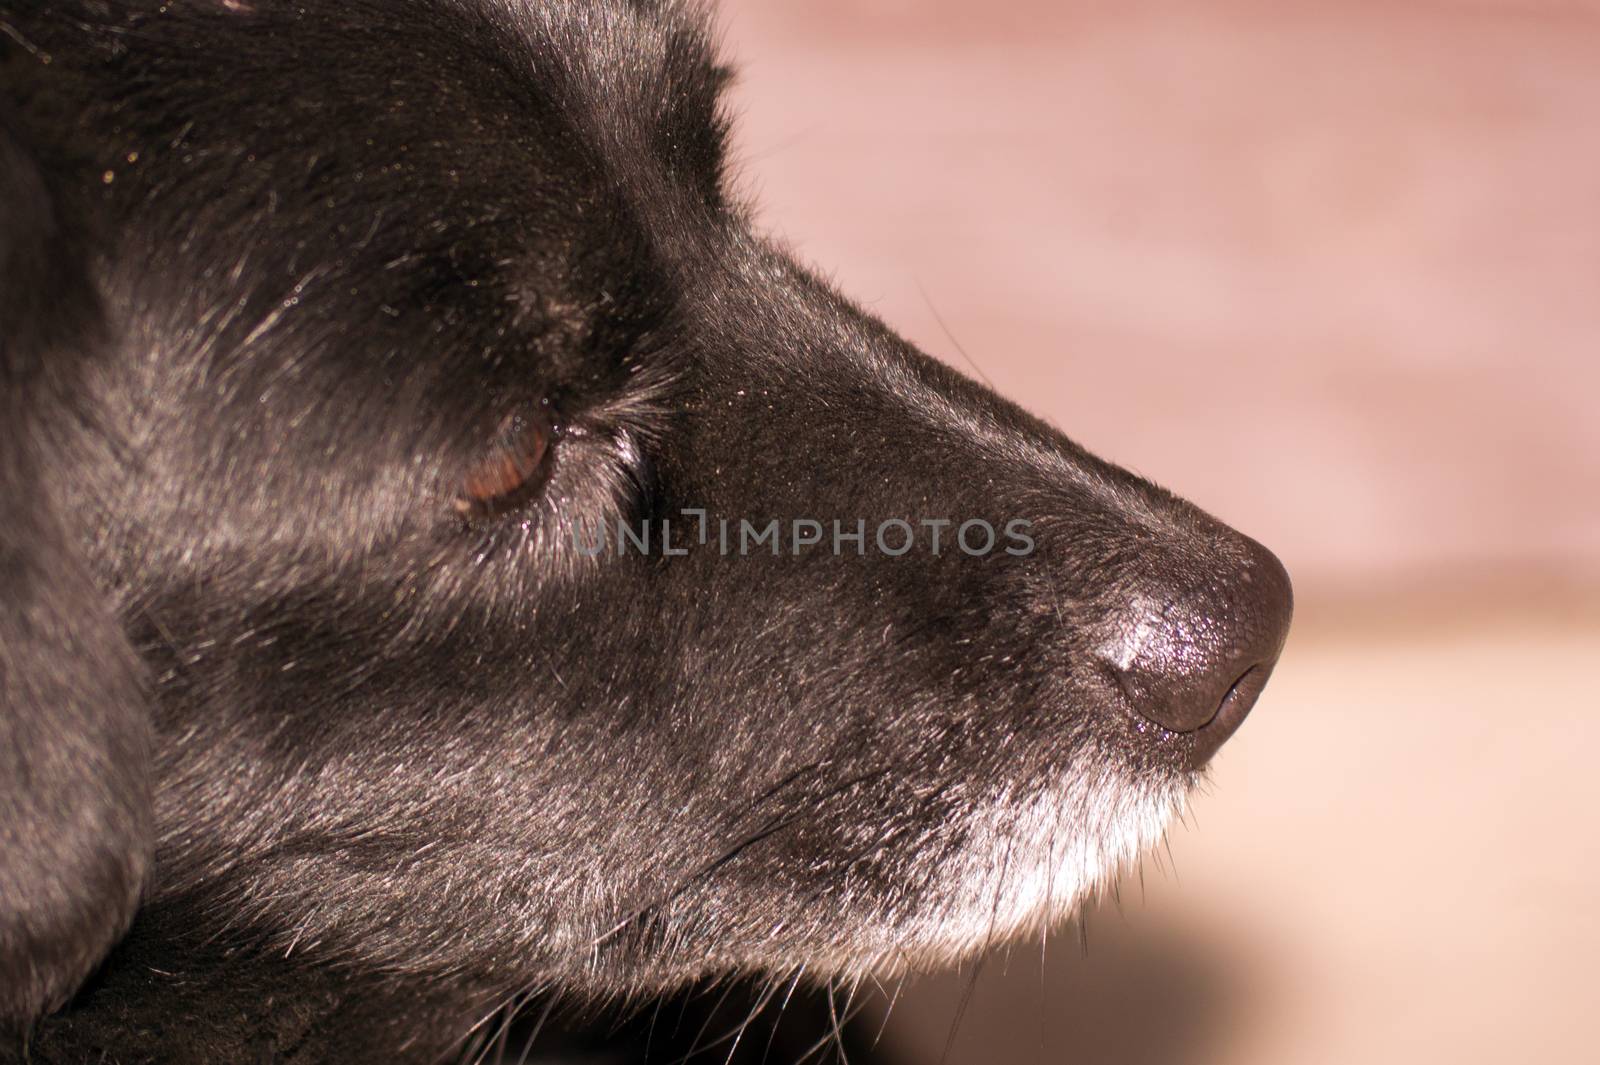 The black dog's nose and sense of smell is an important sensory organ.